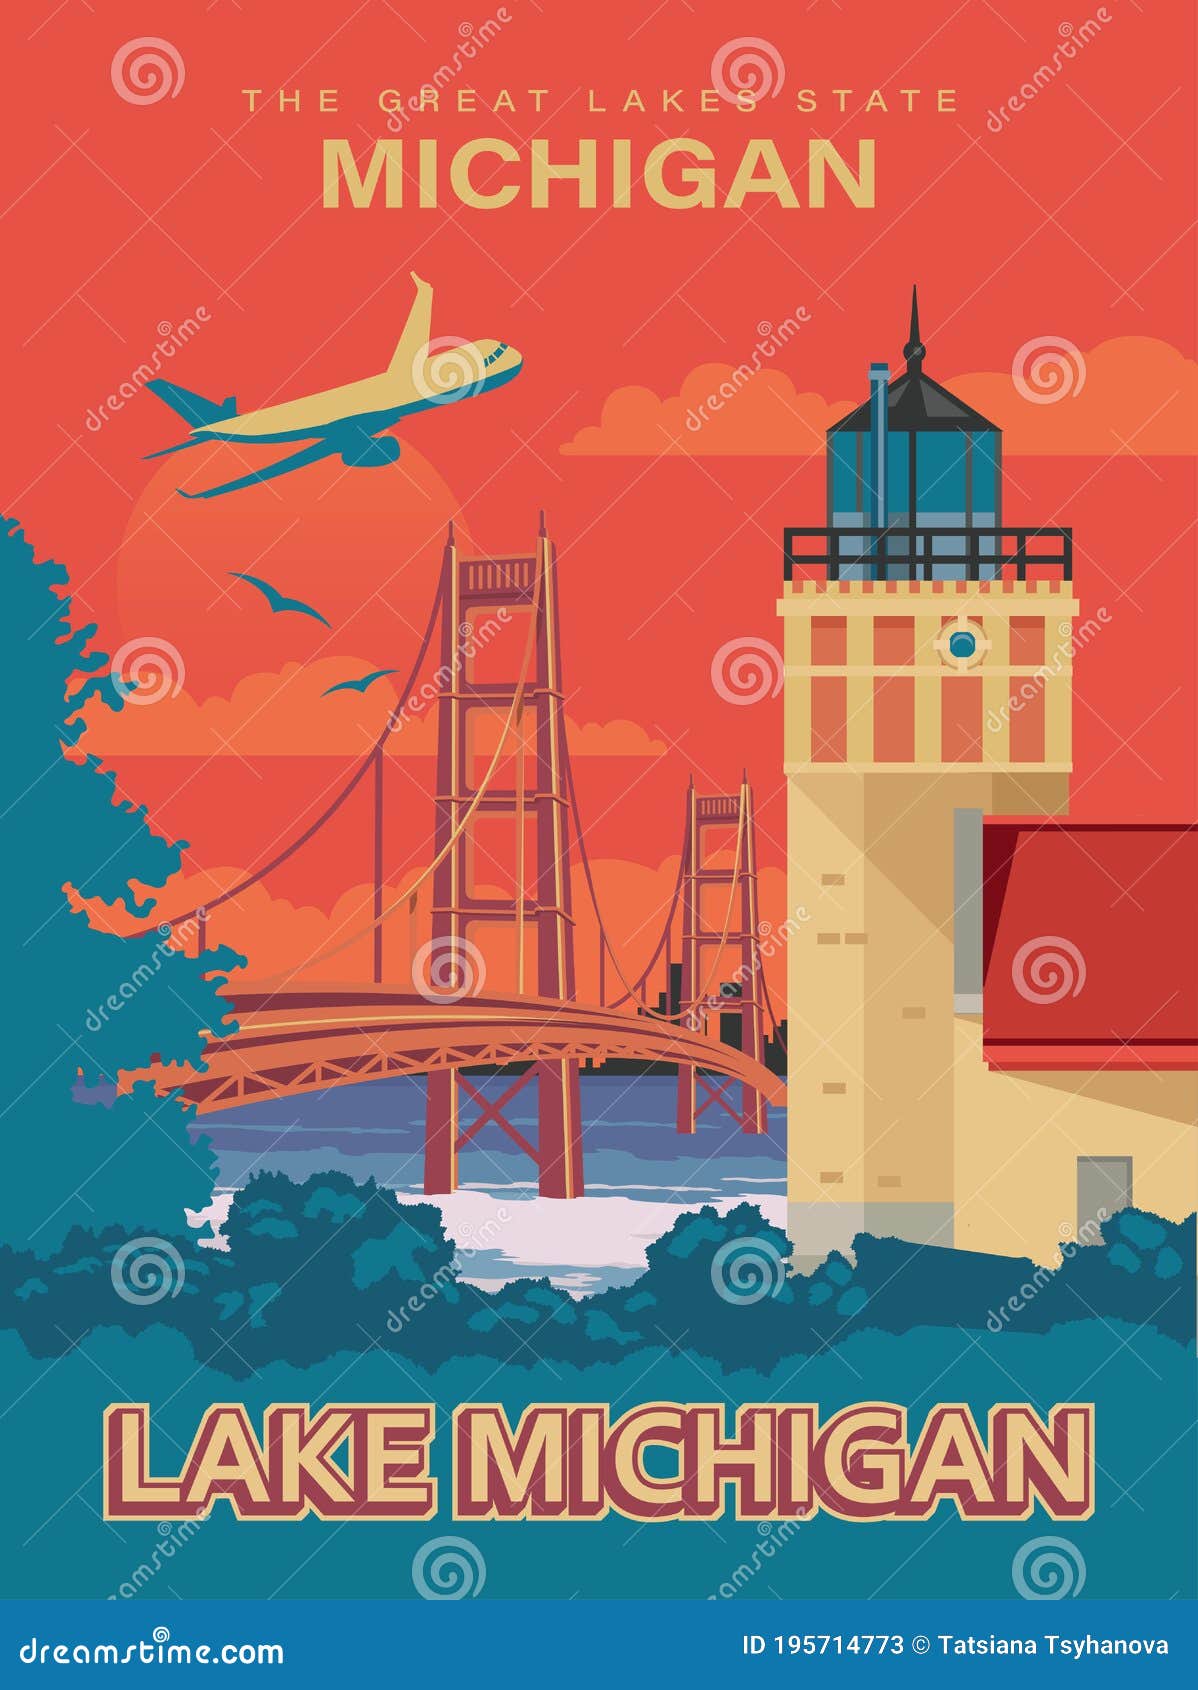 michigan. the great lakes state. touristic poster in 